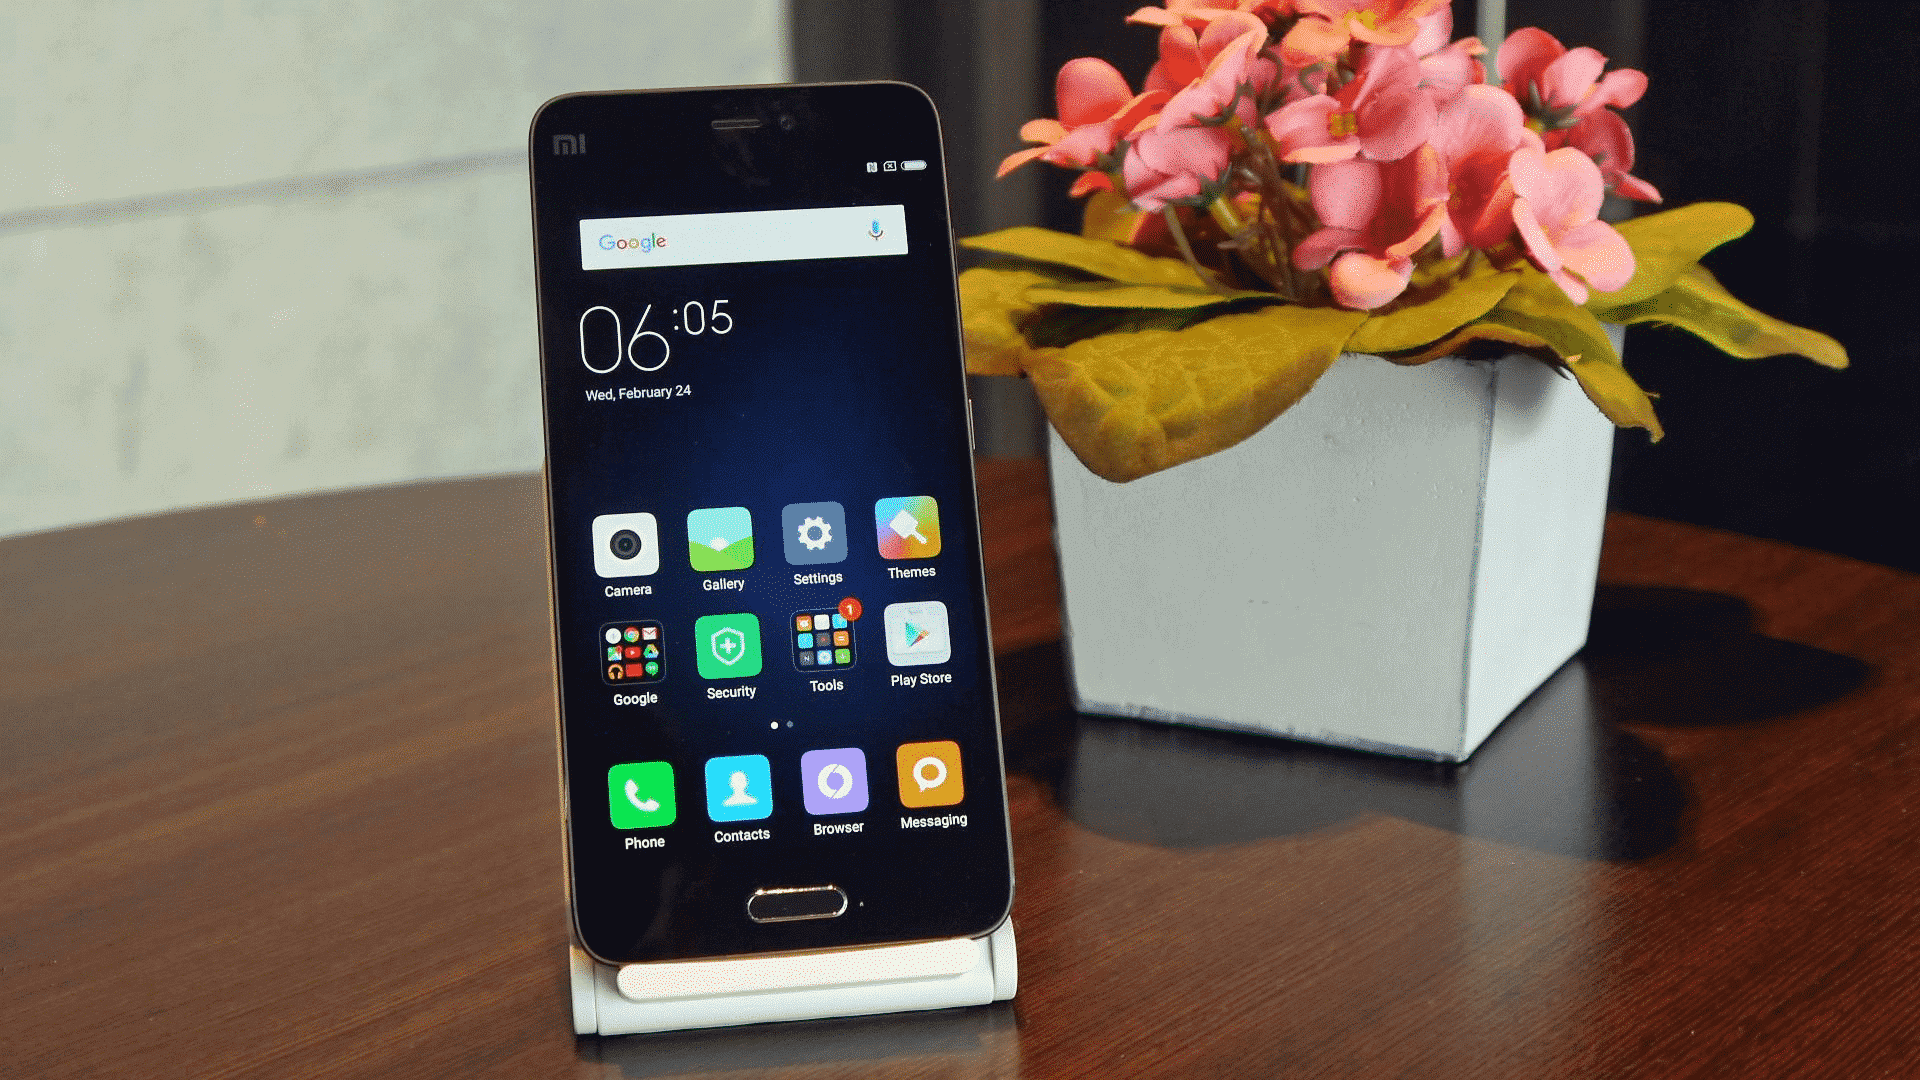 How To Install TWRP Recovery And Root Xiaomi Mi 6